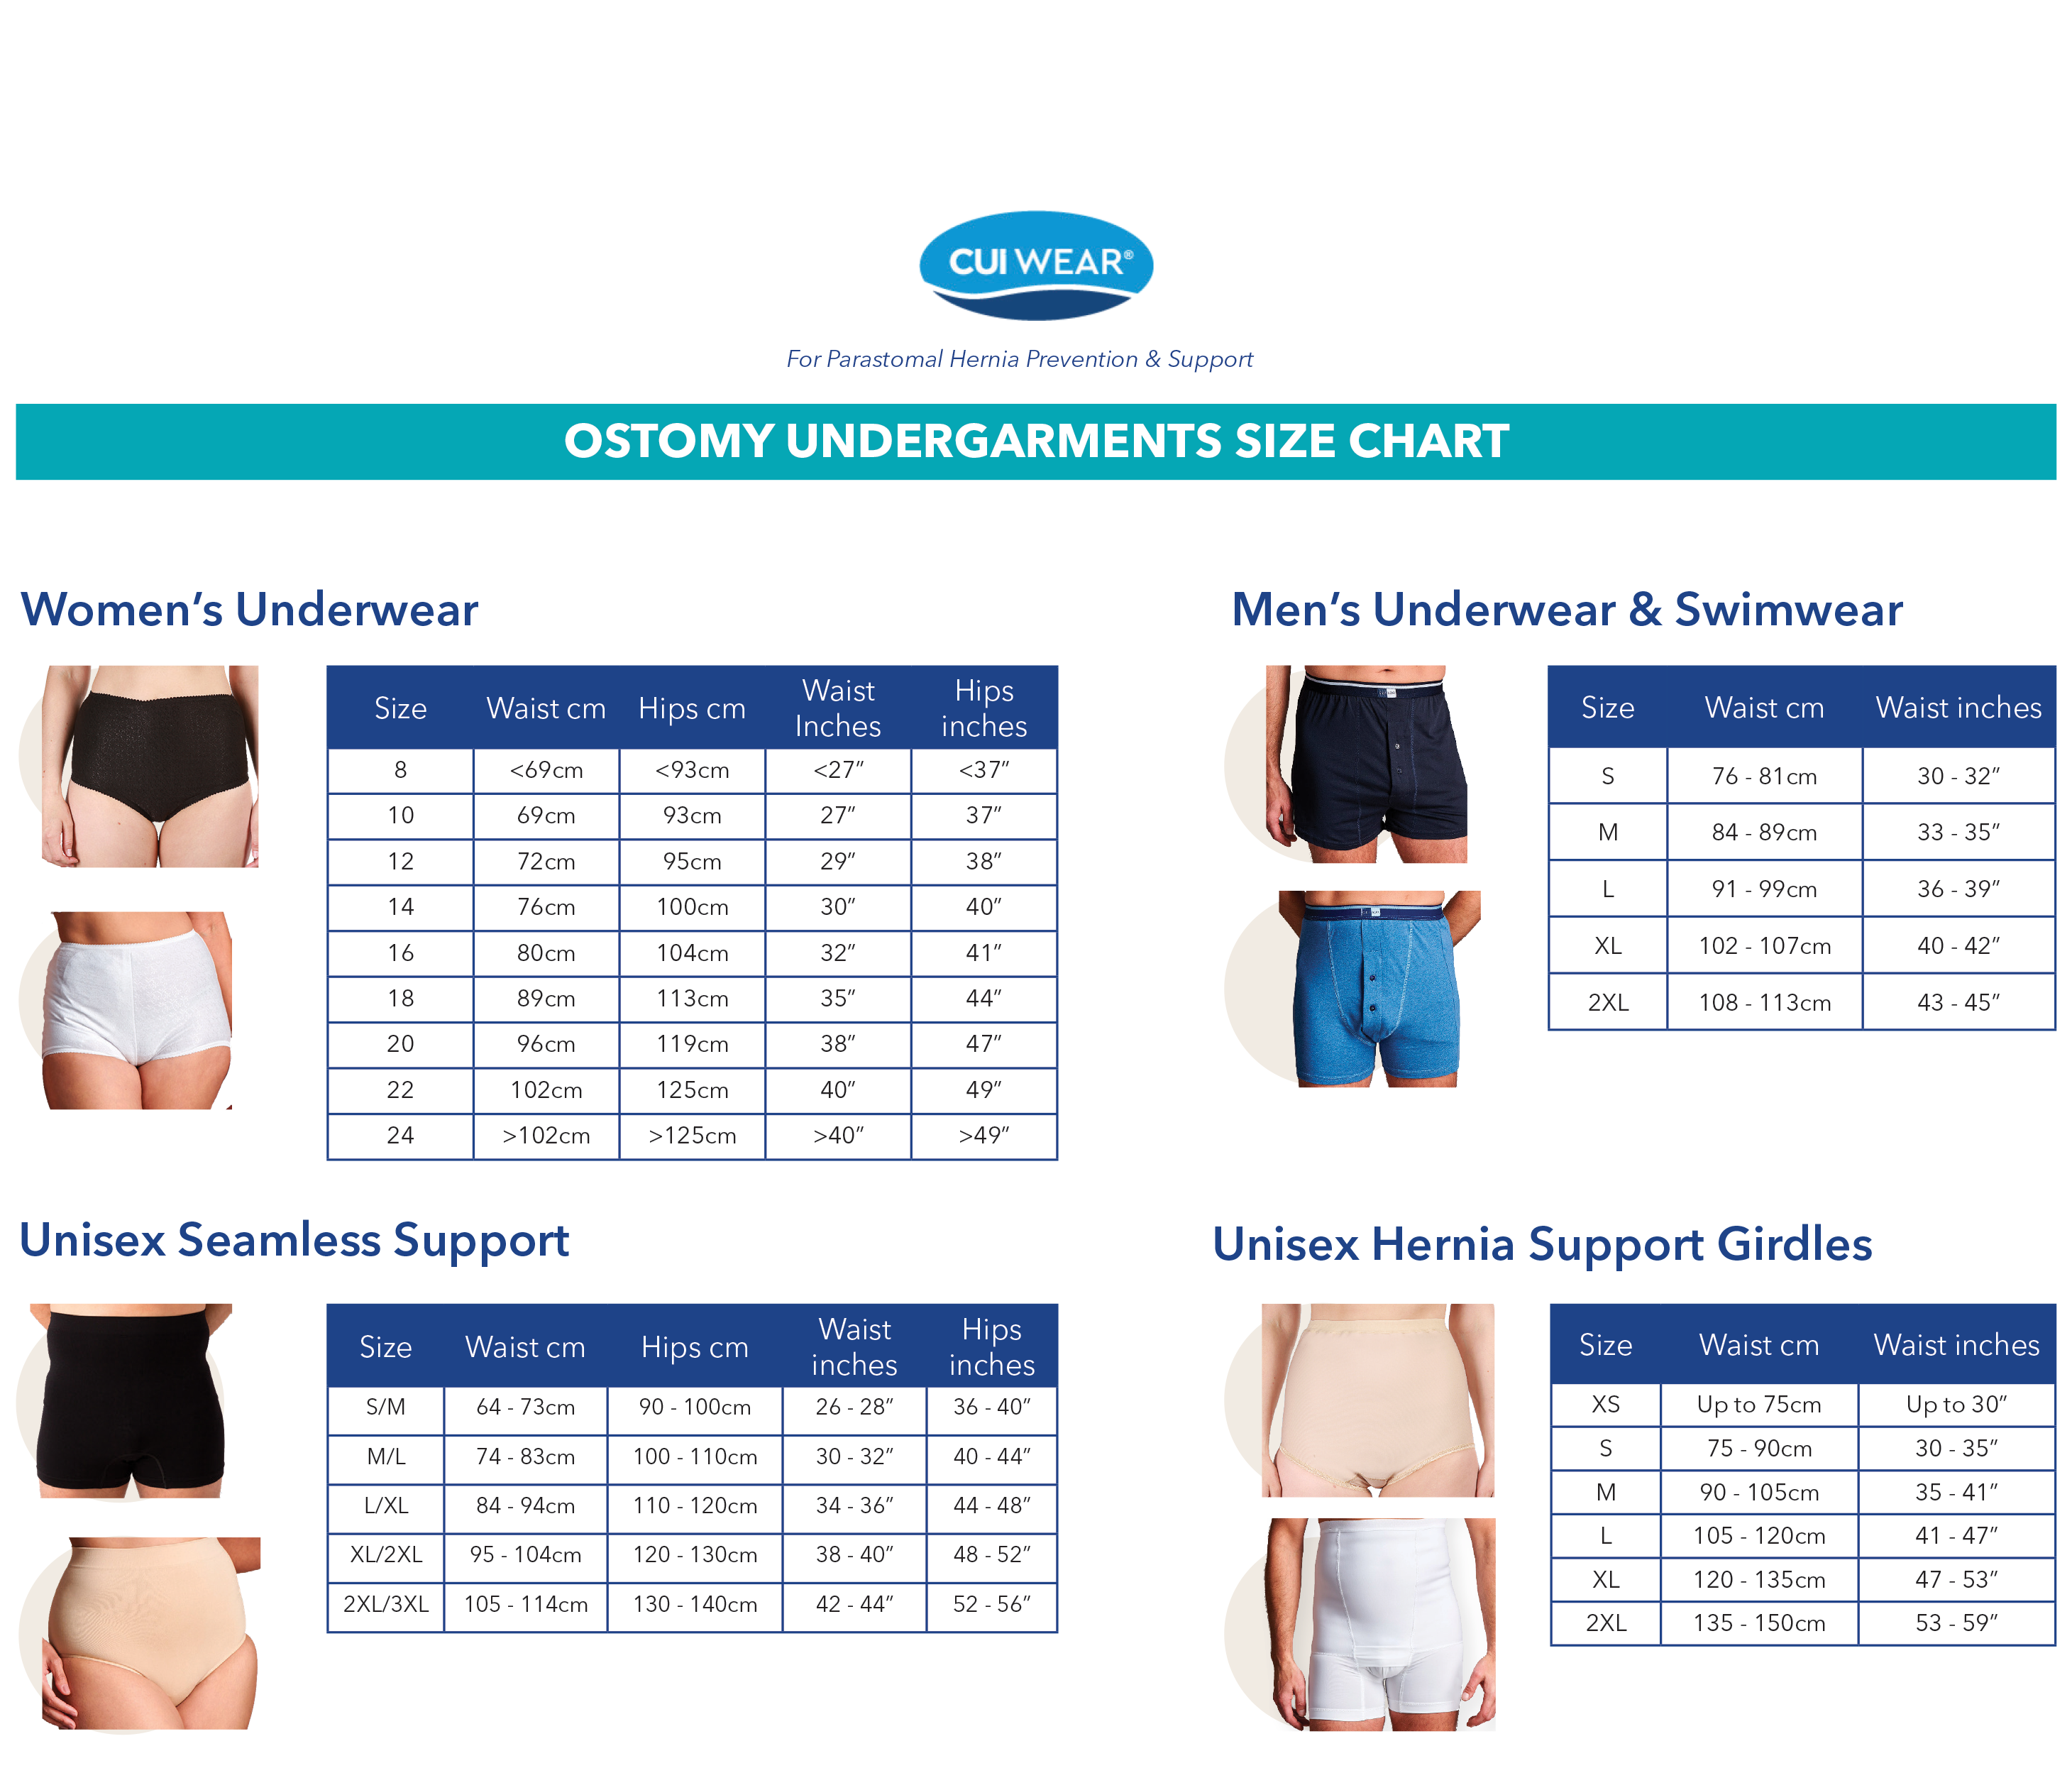 CUI Mens Hernia Low Waist Support Girdle With Legs - 1 each, XSMALL, BLACK - 0